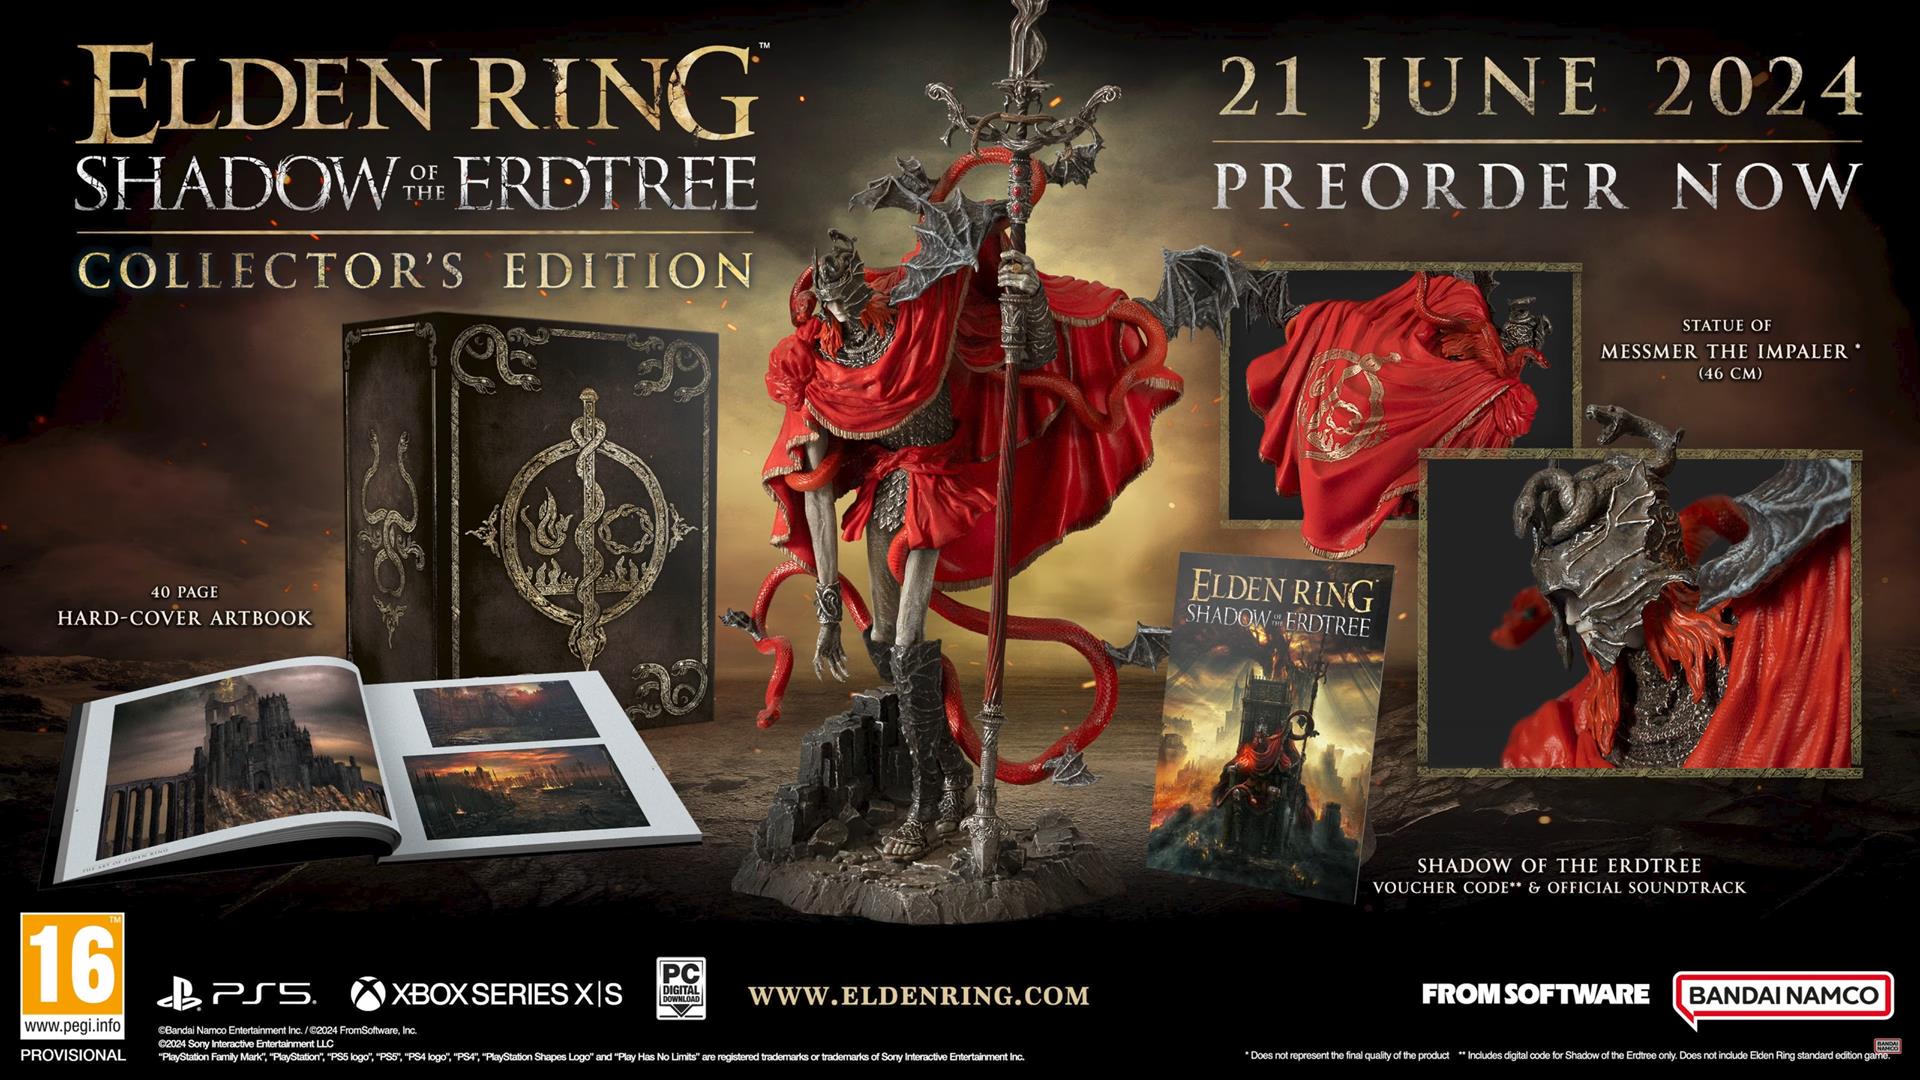 Elden Ring: PS4, PS4 Pro, Xbox One S